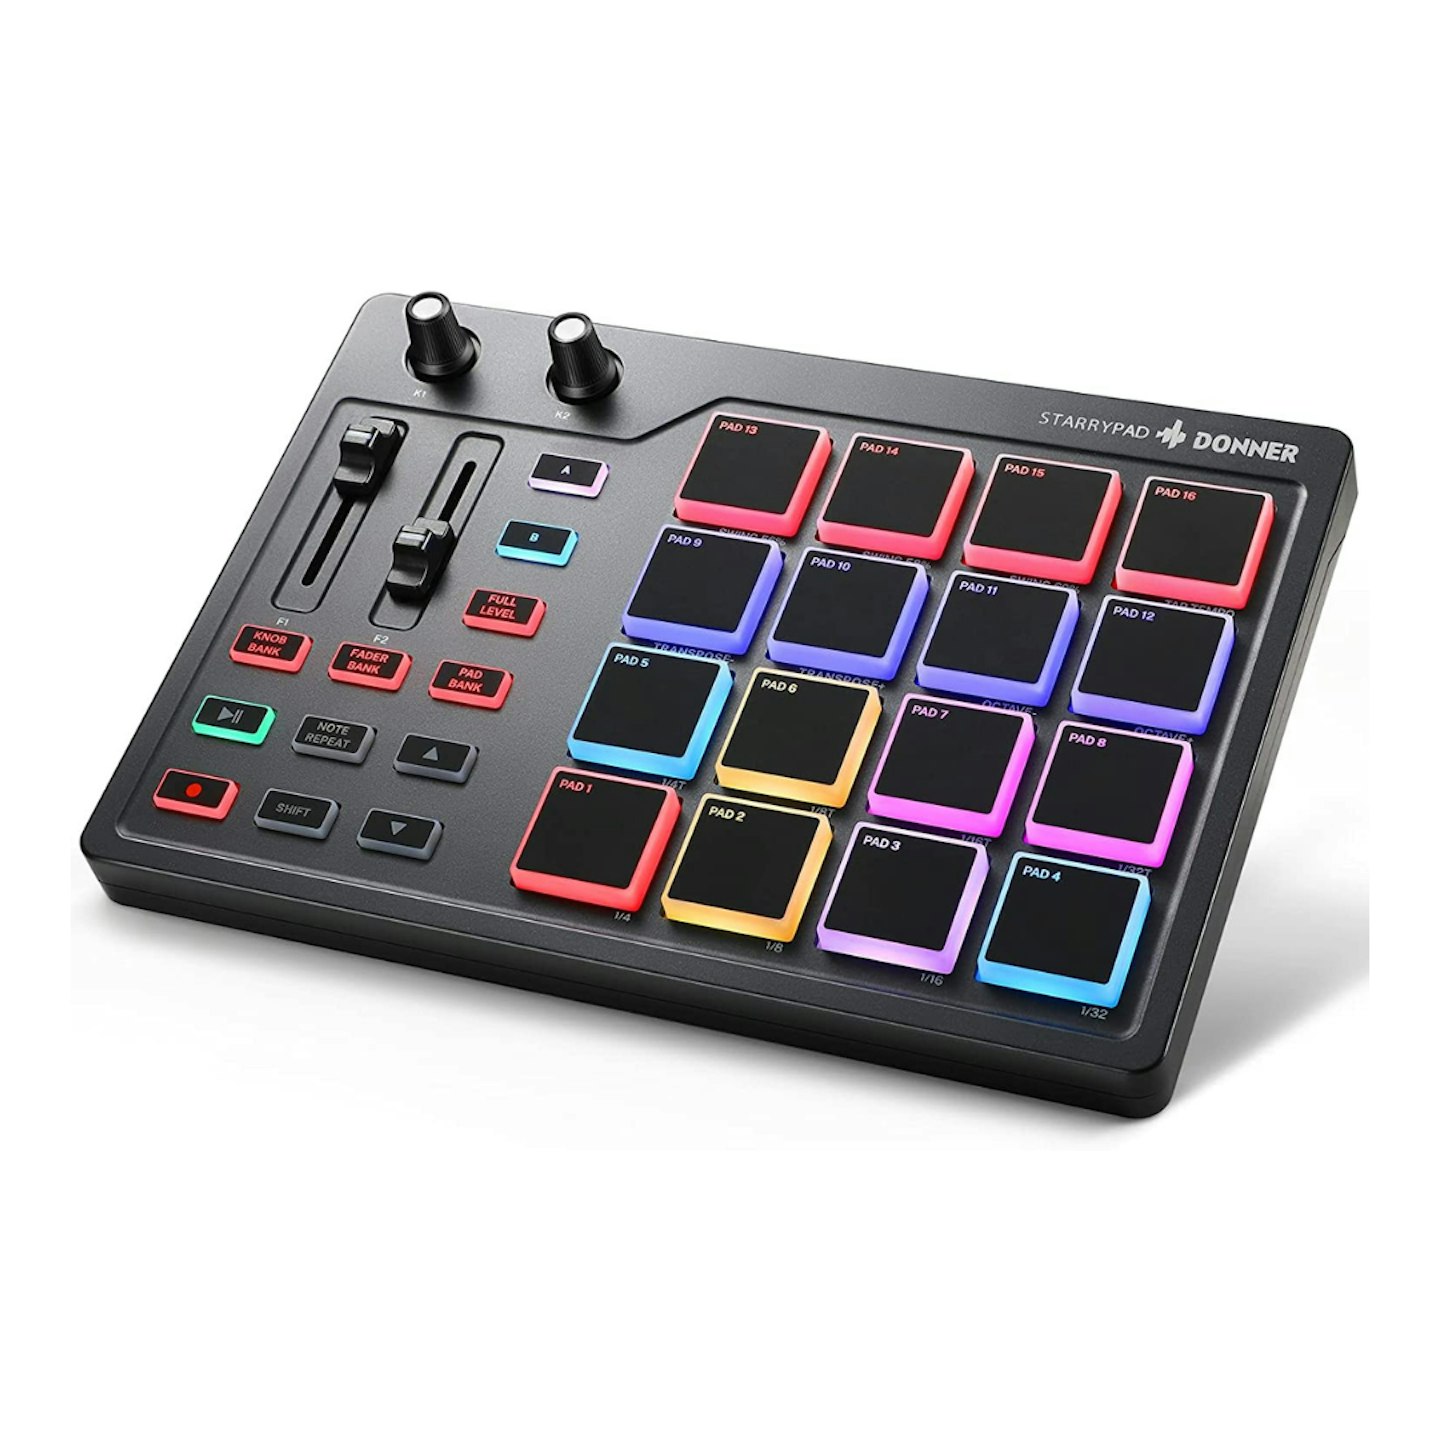 Donner MIDI Pad Controller for digital audio workstations